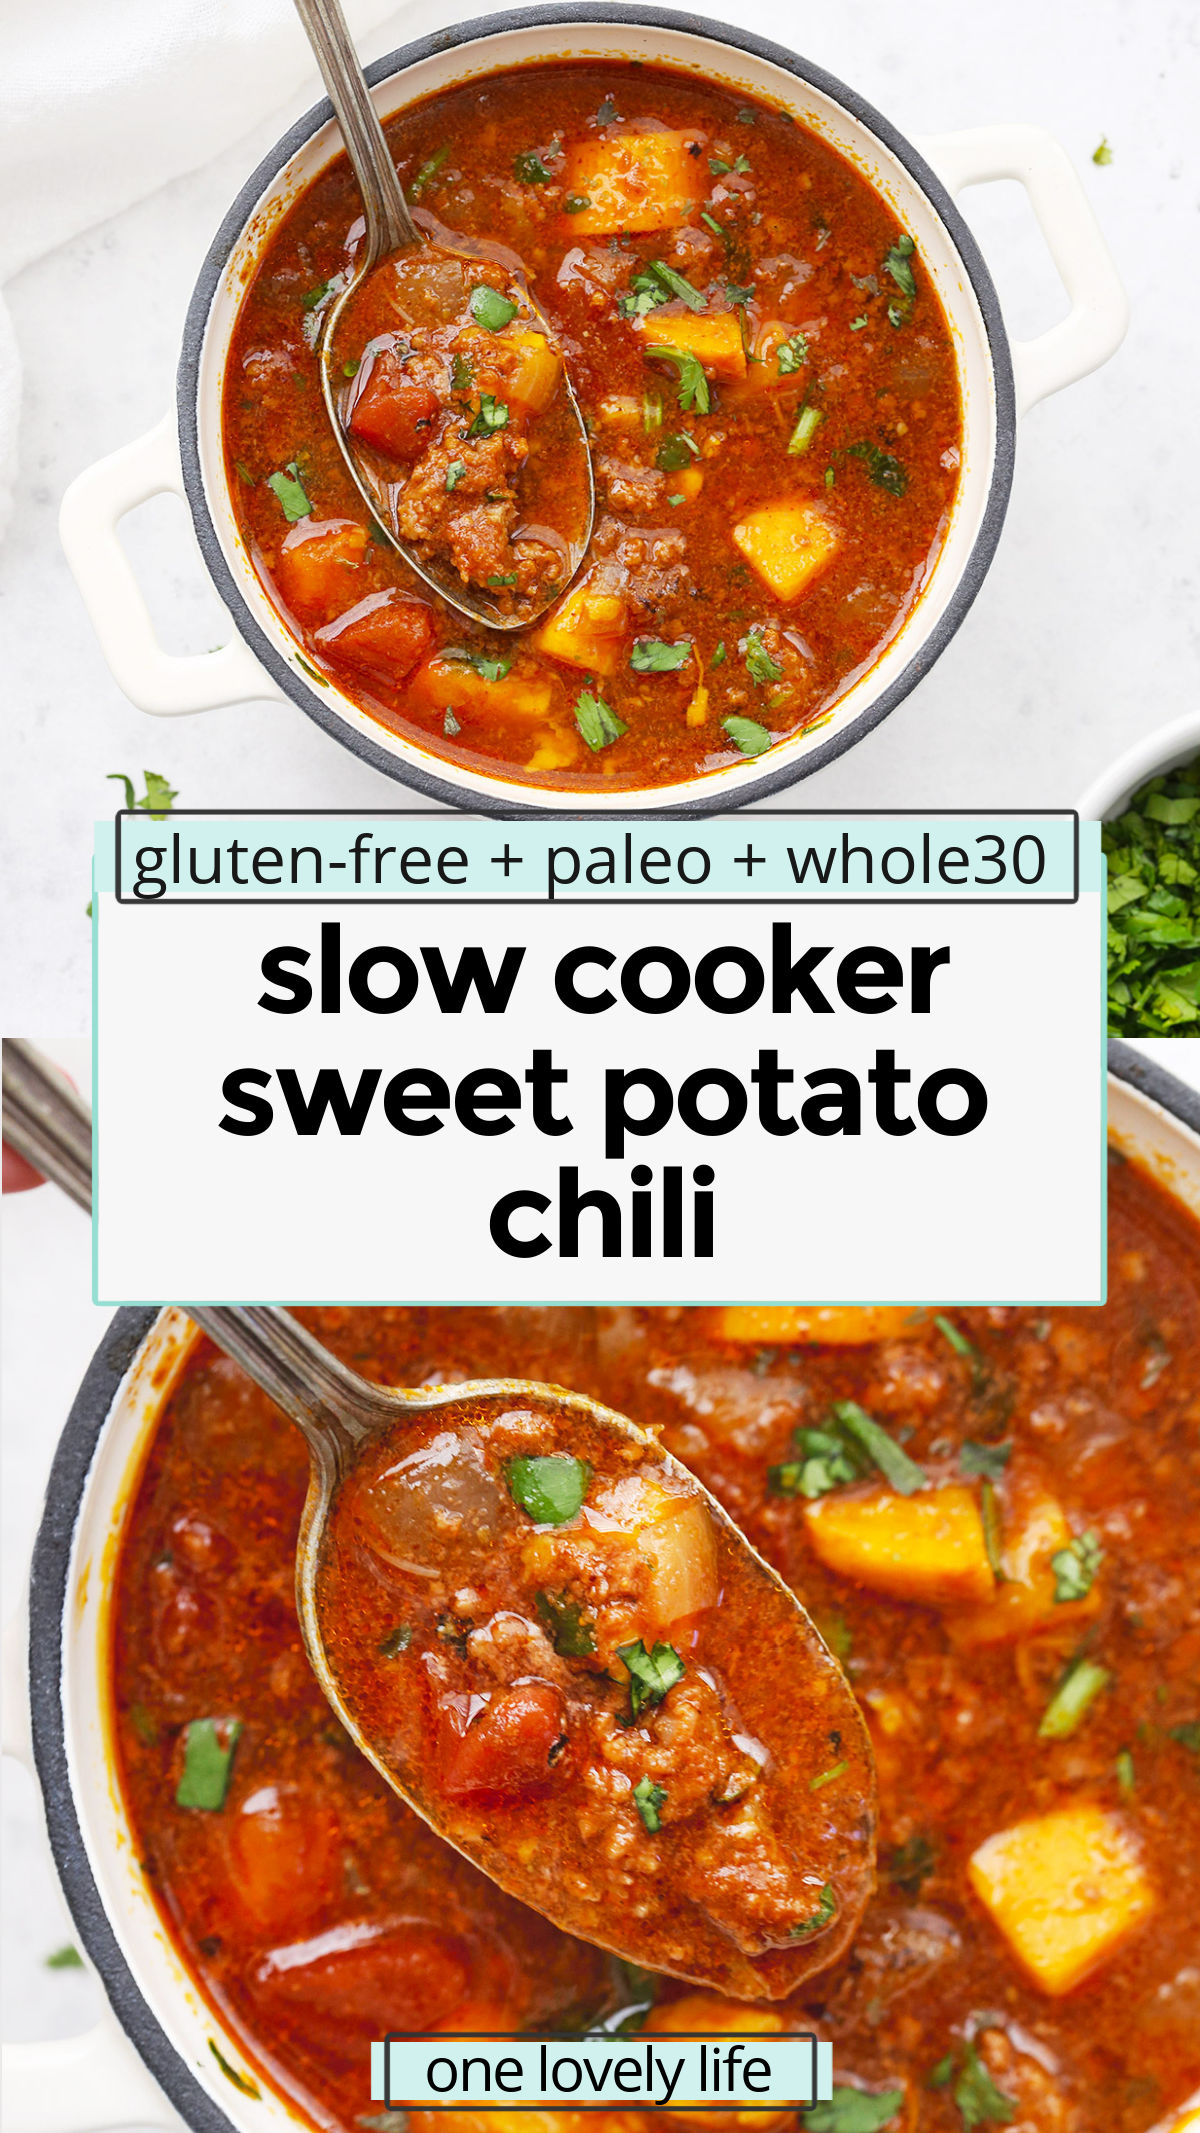 Slow Cooker Sweet Potato Chili - This paleo sweet potato chili recipe is one of our favorites. It tastes even better the next day! (Gluten-Free, Whole30) // Whole30 chili // crock pot sweet potato chili // paleo chili // chili no beans // chili without beans // healthy chili //